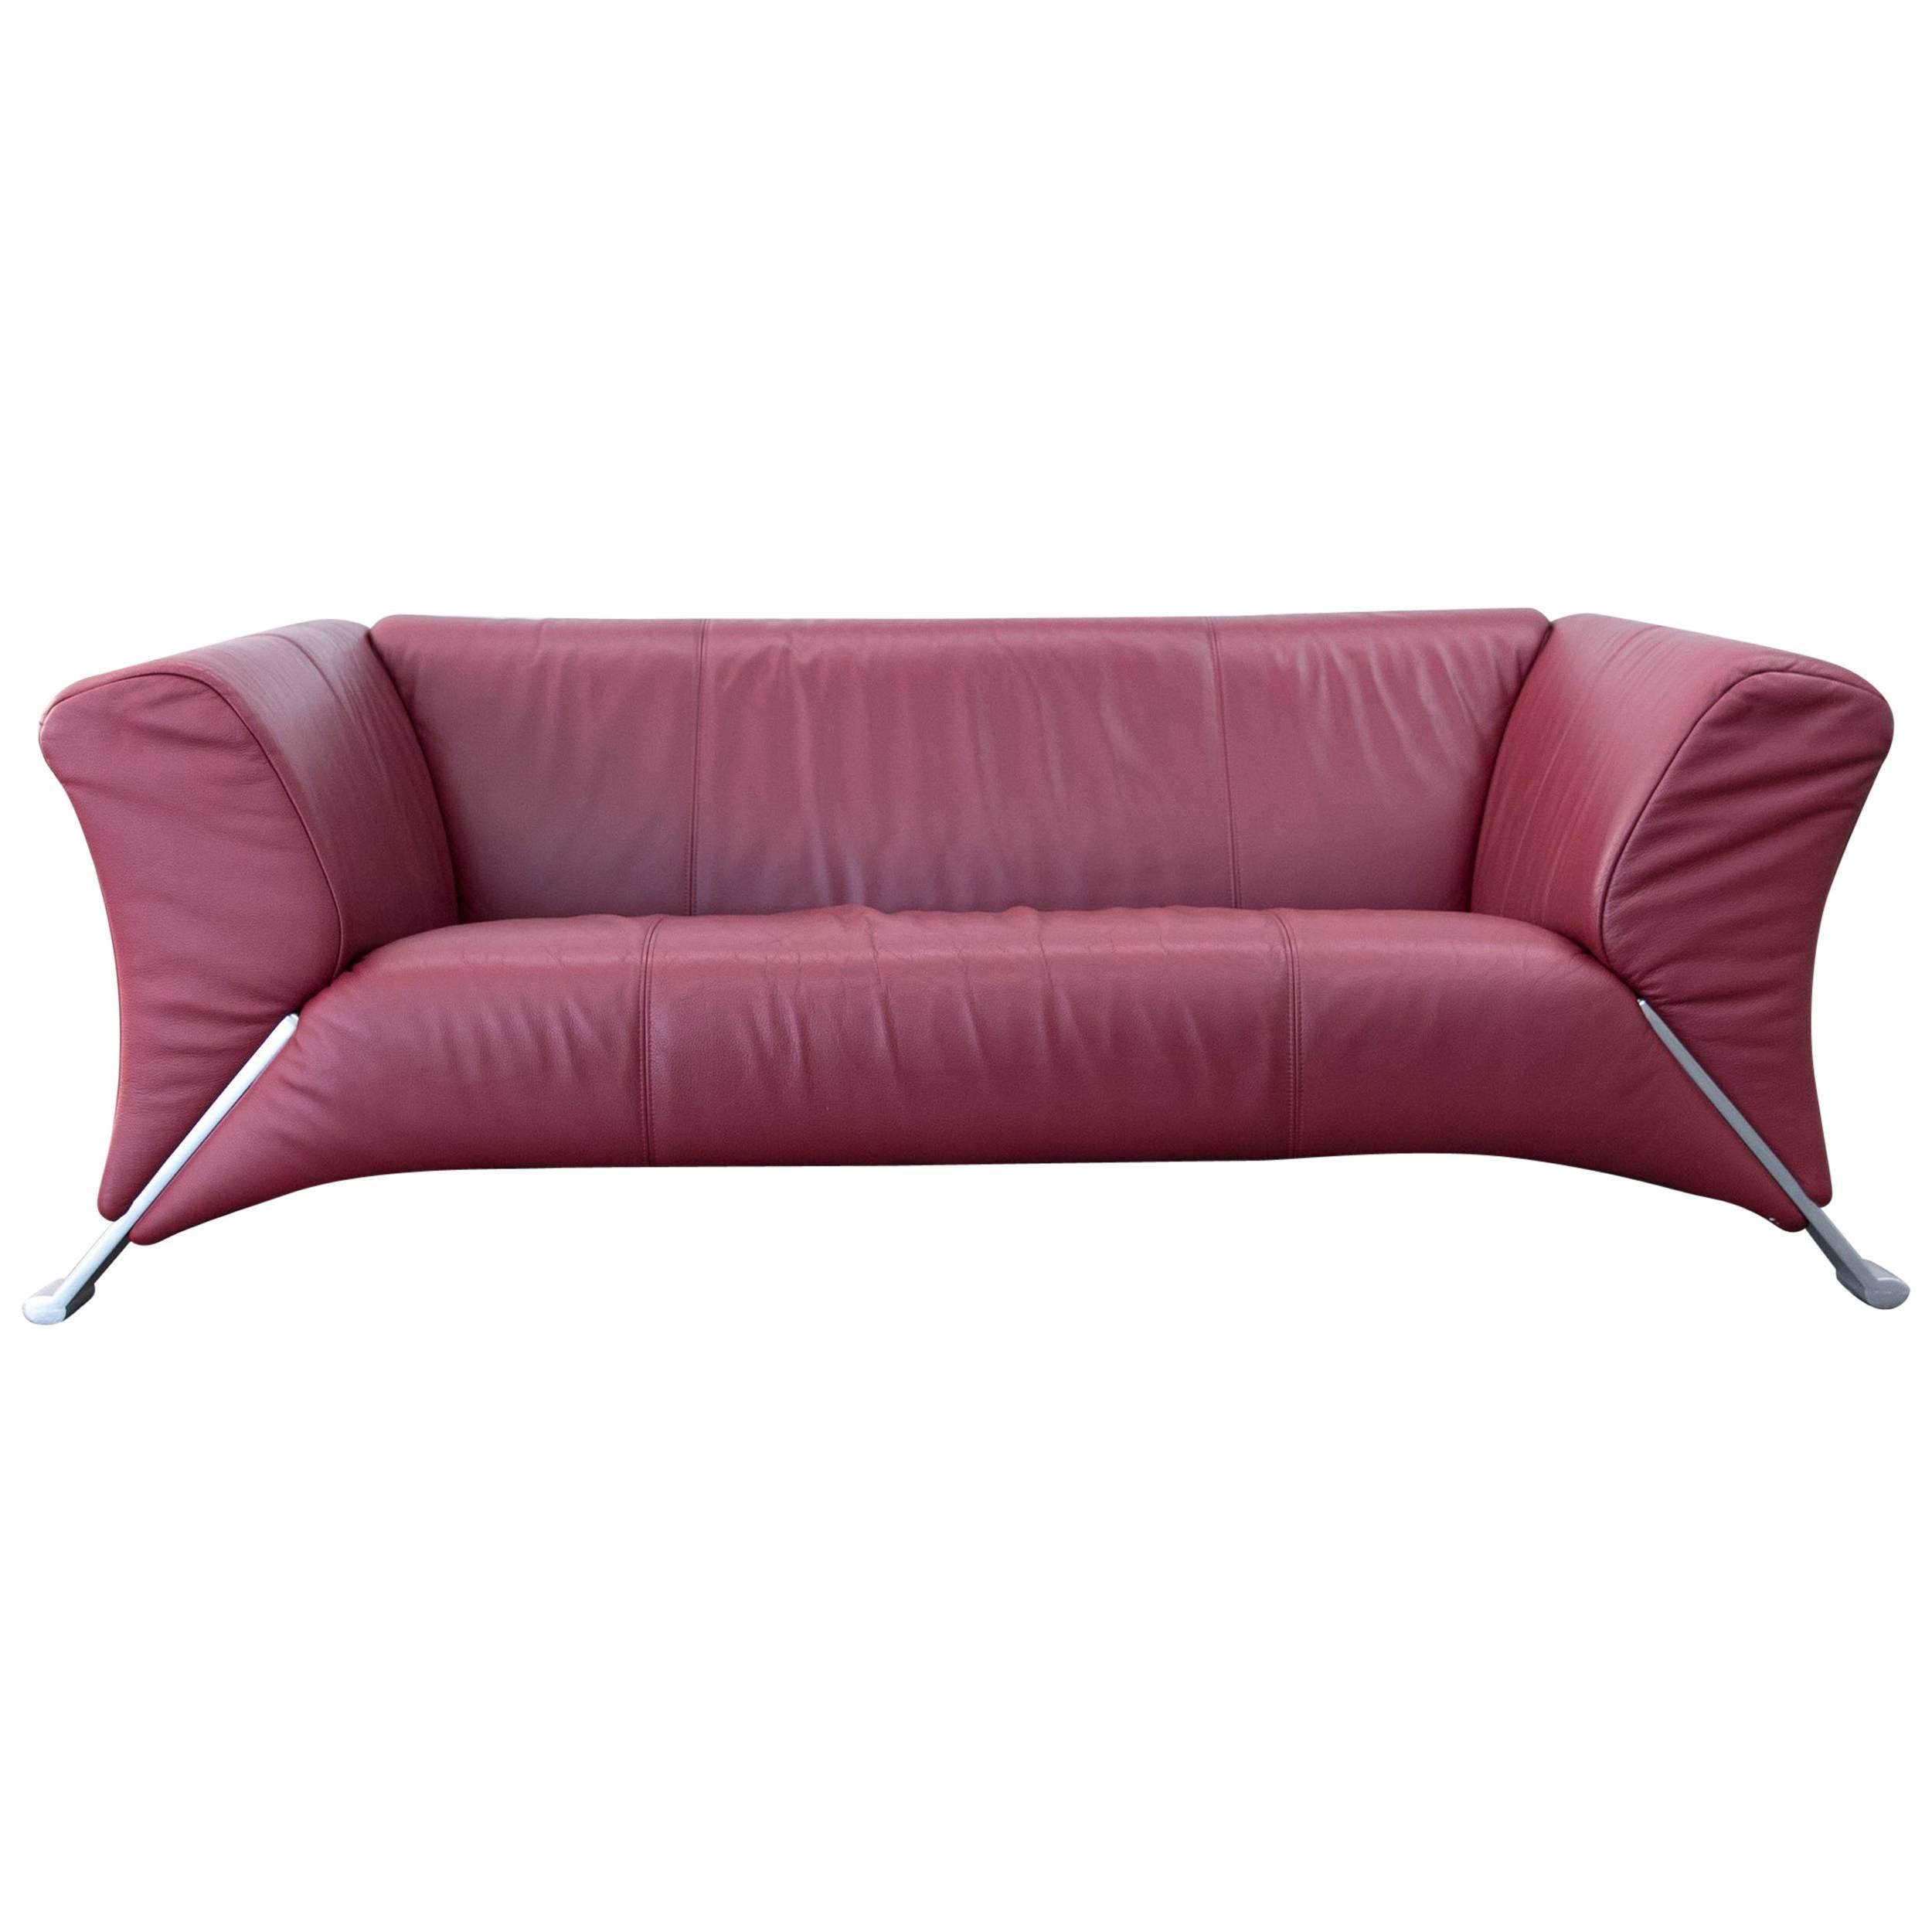 Rolf Benz 322 Designer Sofa Leather Red Two-Seat Modern For Sale